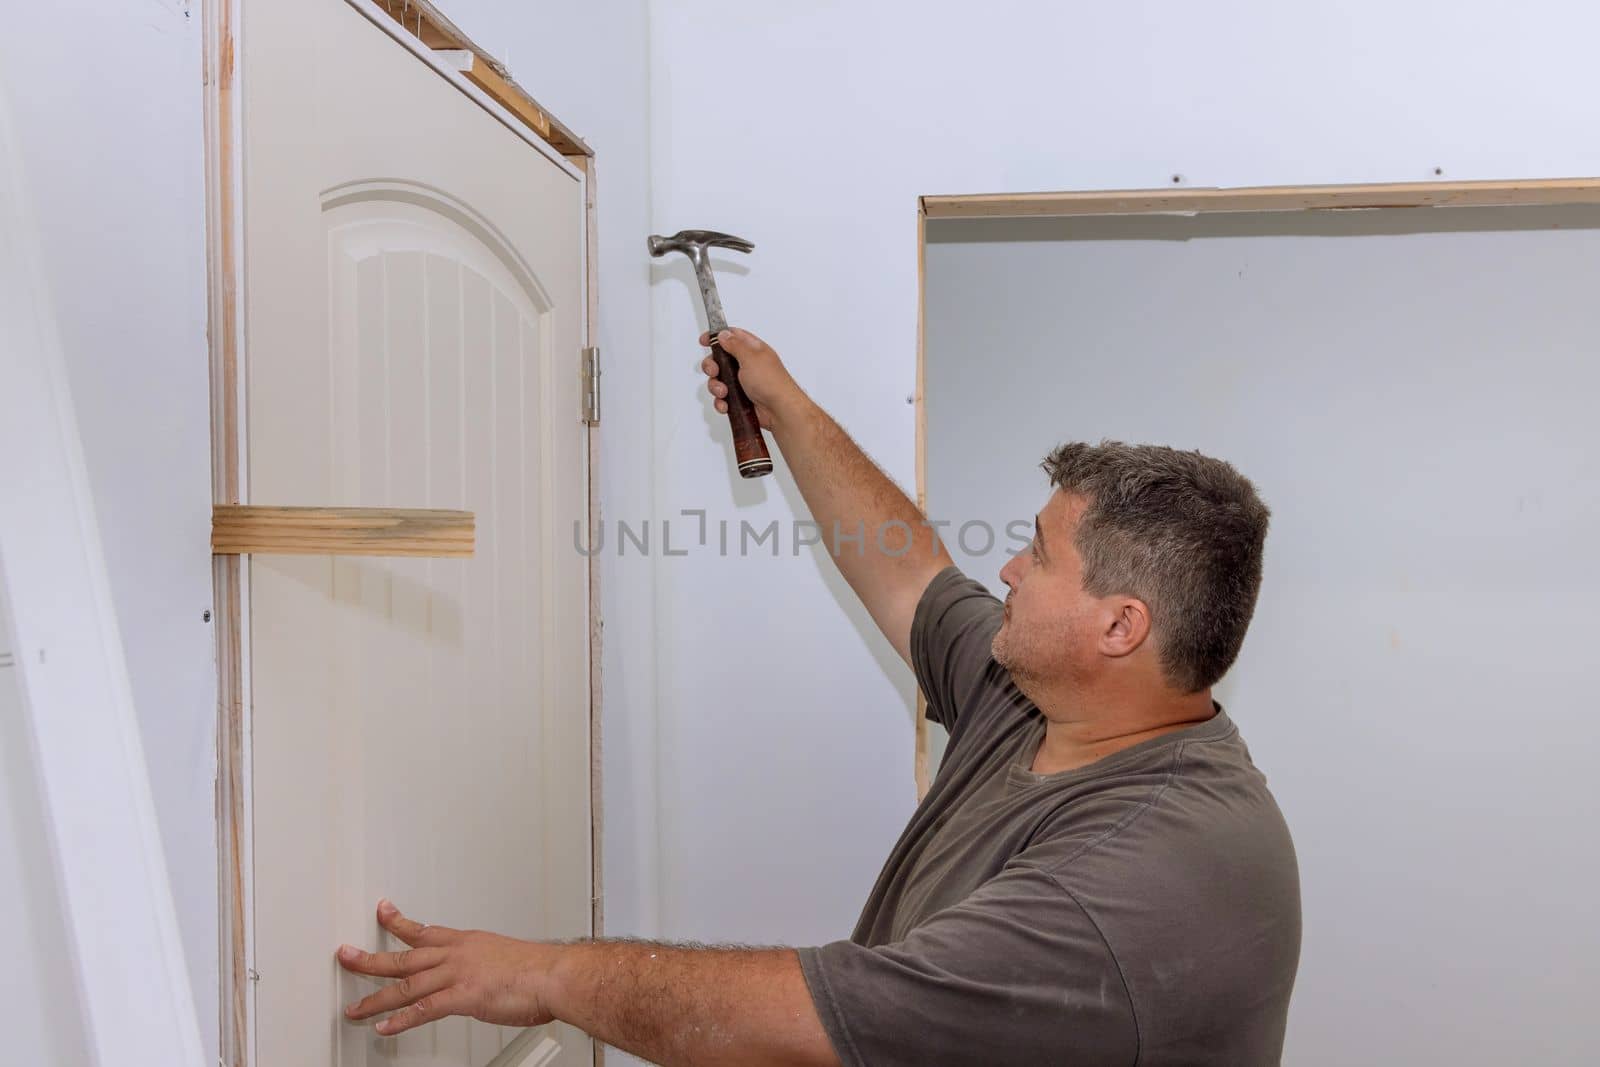 As trim carpenter, during installation of new house, hammer are used to attach doors to interior